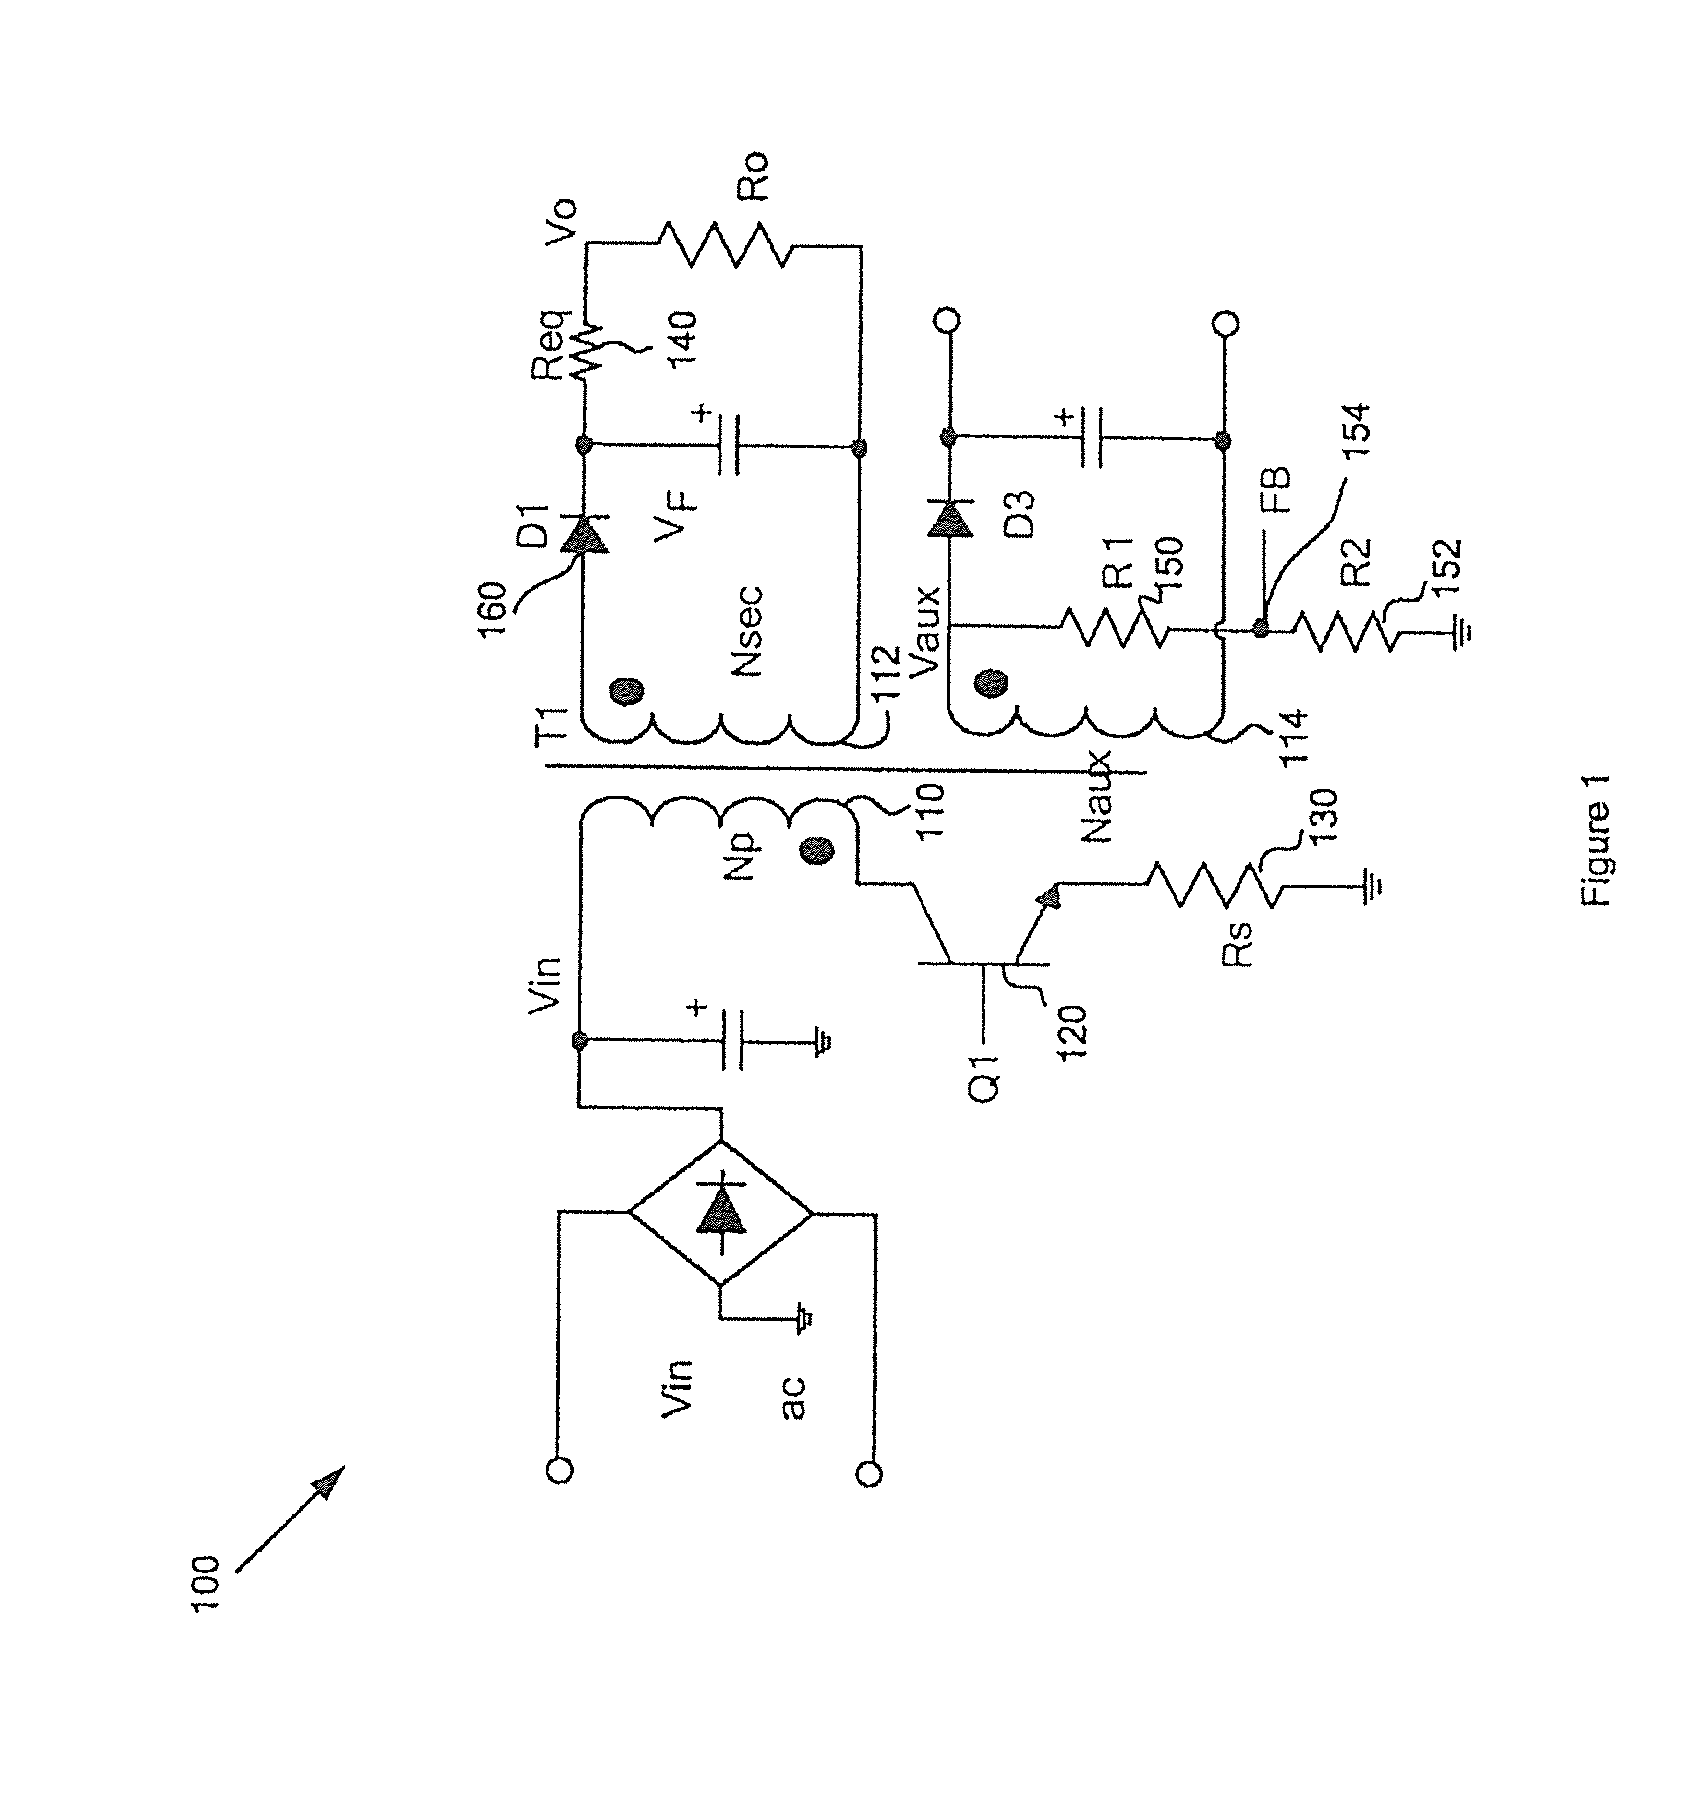 Systems and methods for flyback power converters with switching frequency and peak current adjustments based on changes in feedback signals